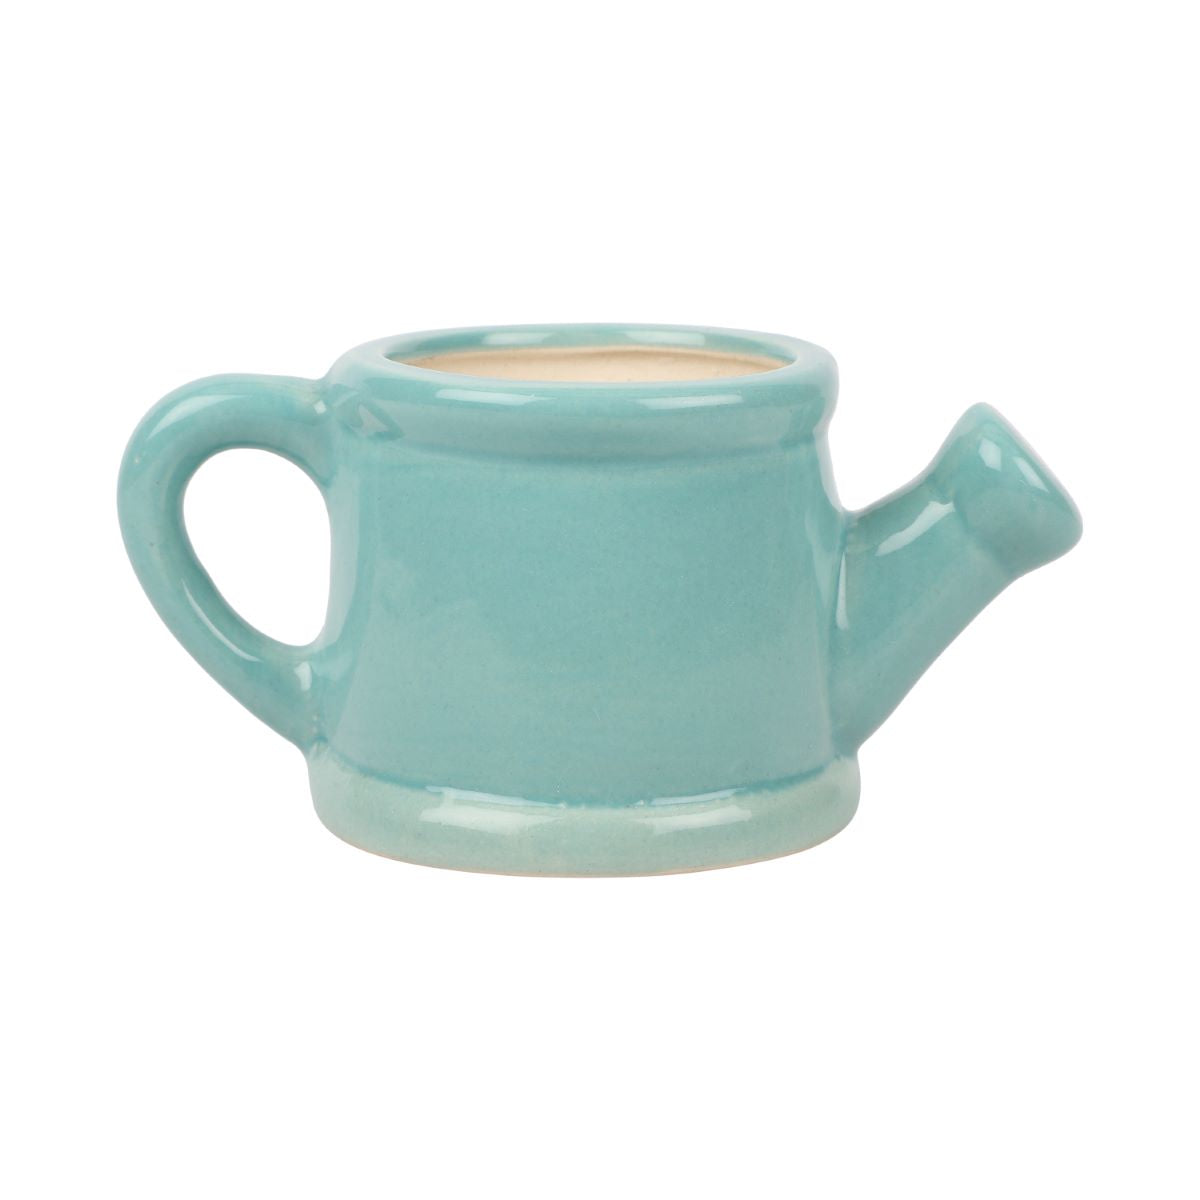 Mini Watering Can Shaped Ceramic Planter